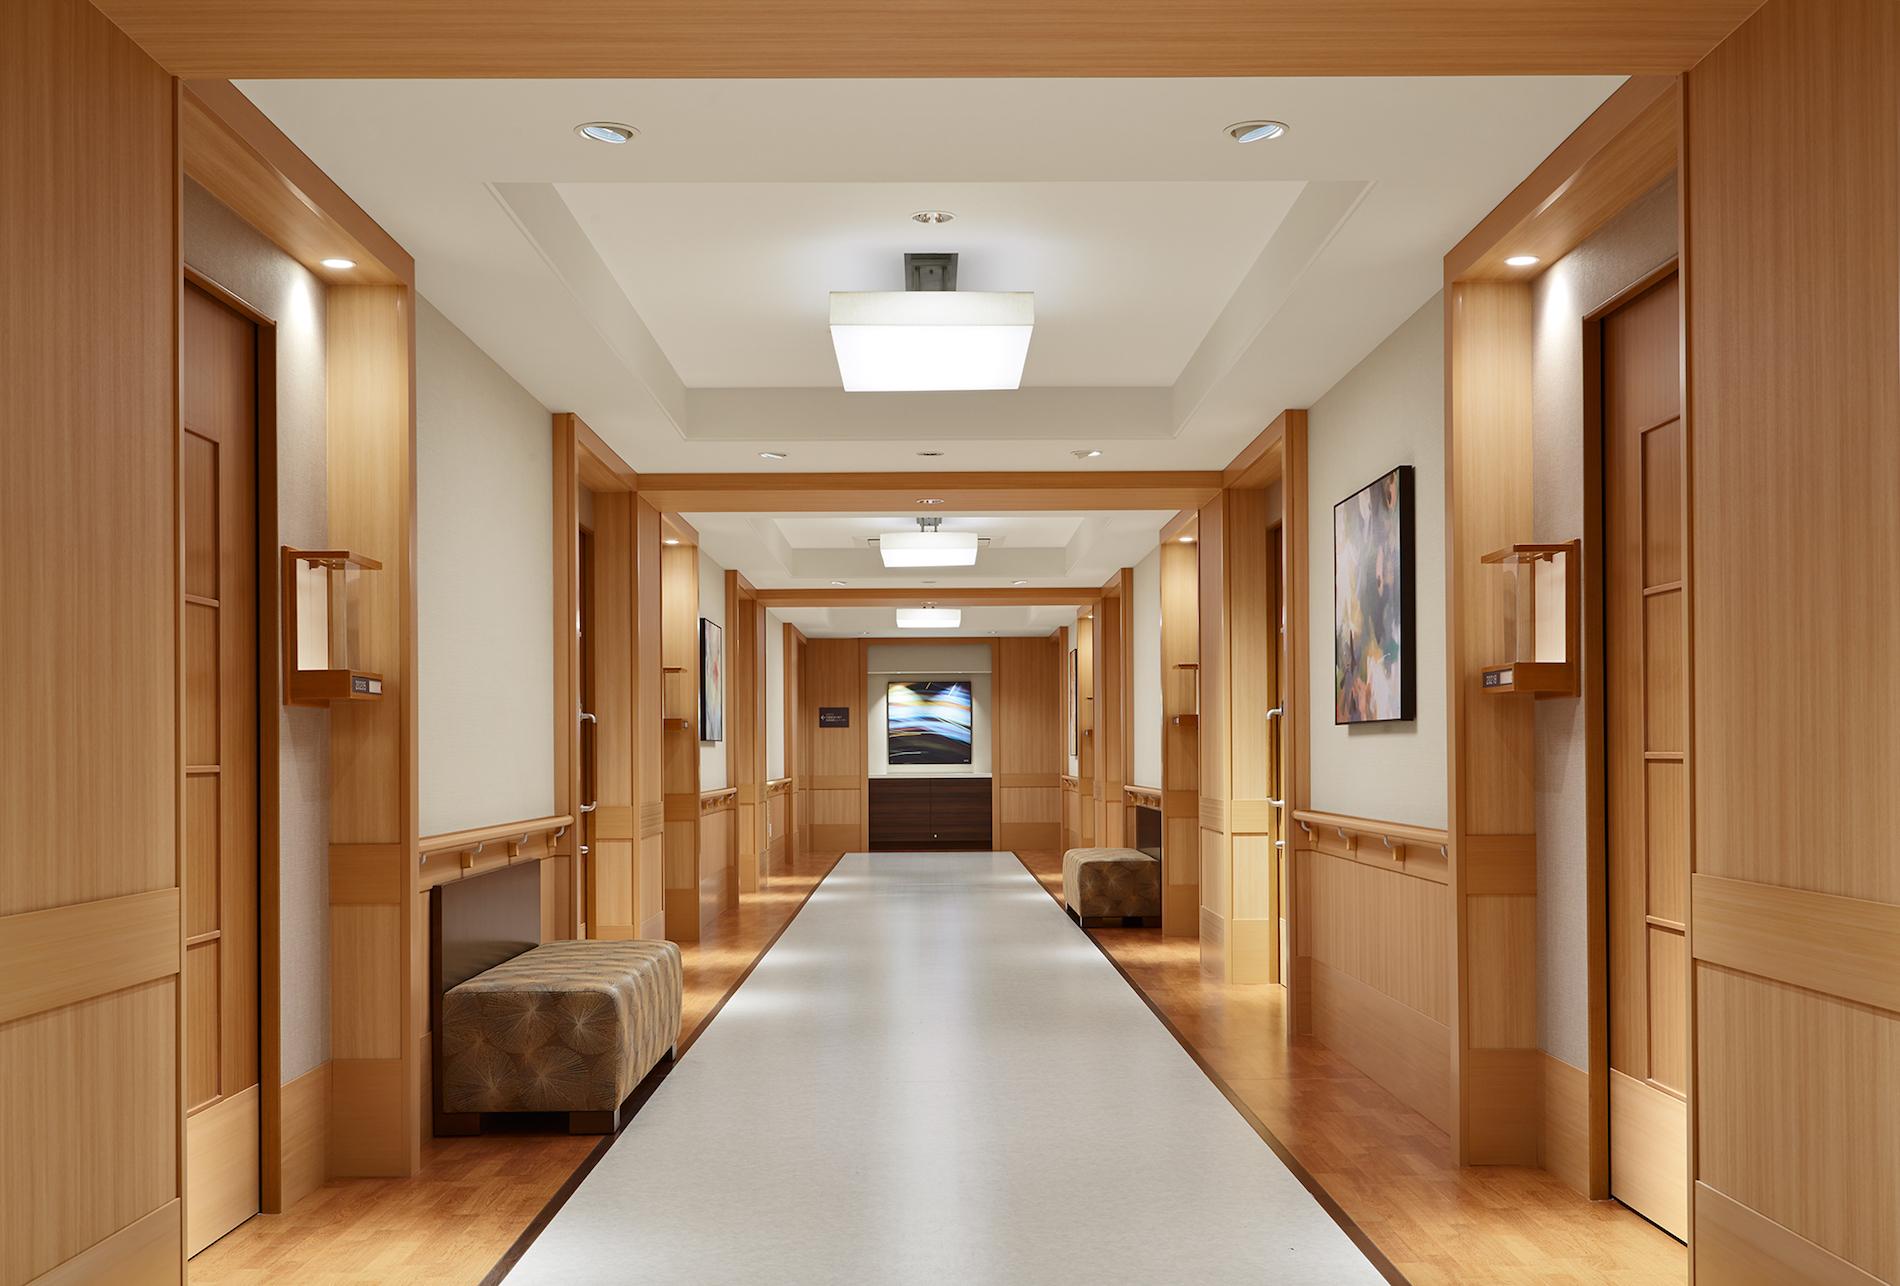 This Japanese Retirement Residence is Imbued with Zen and Serenity